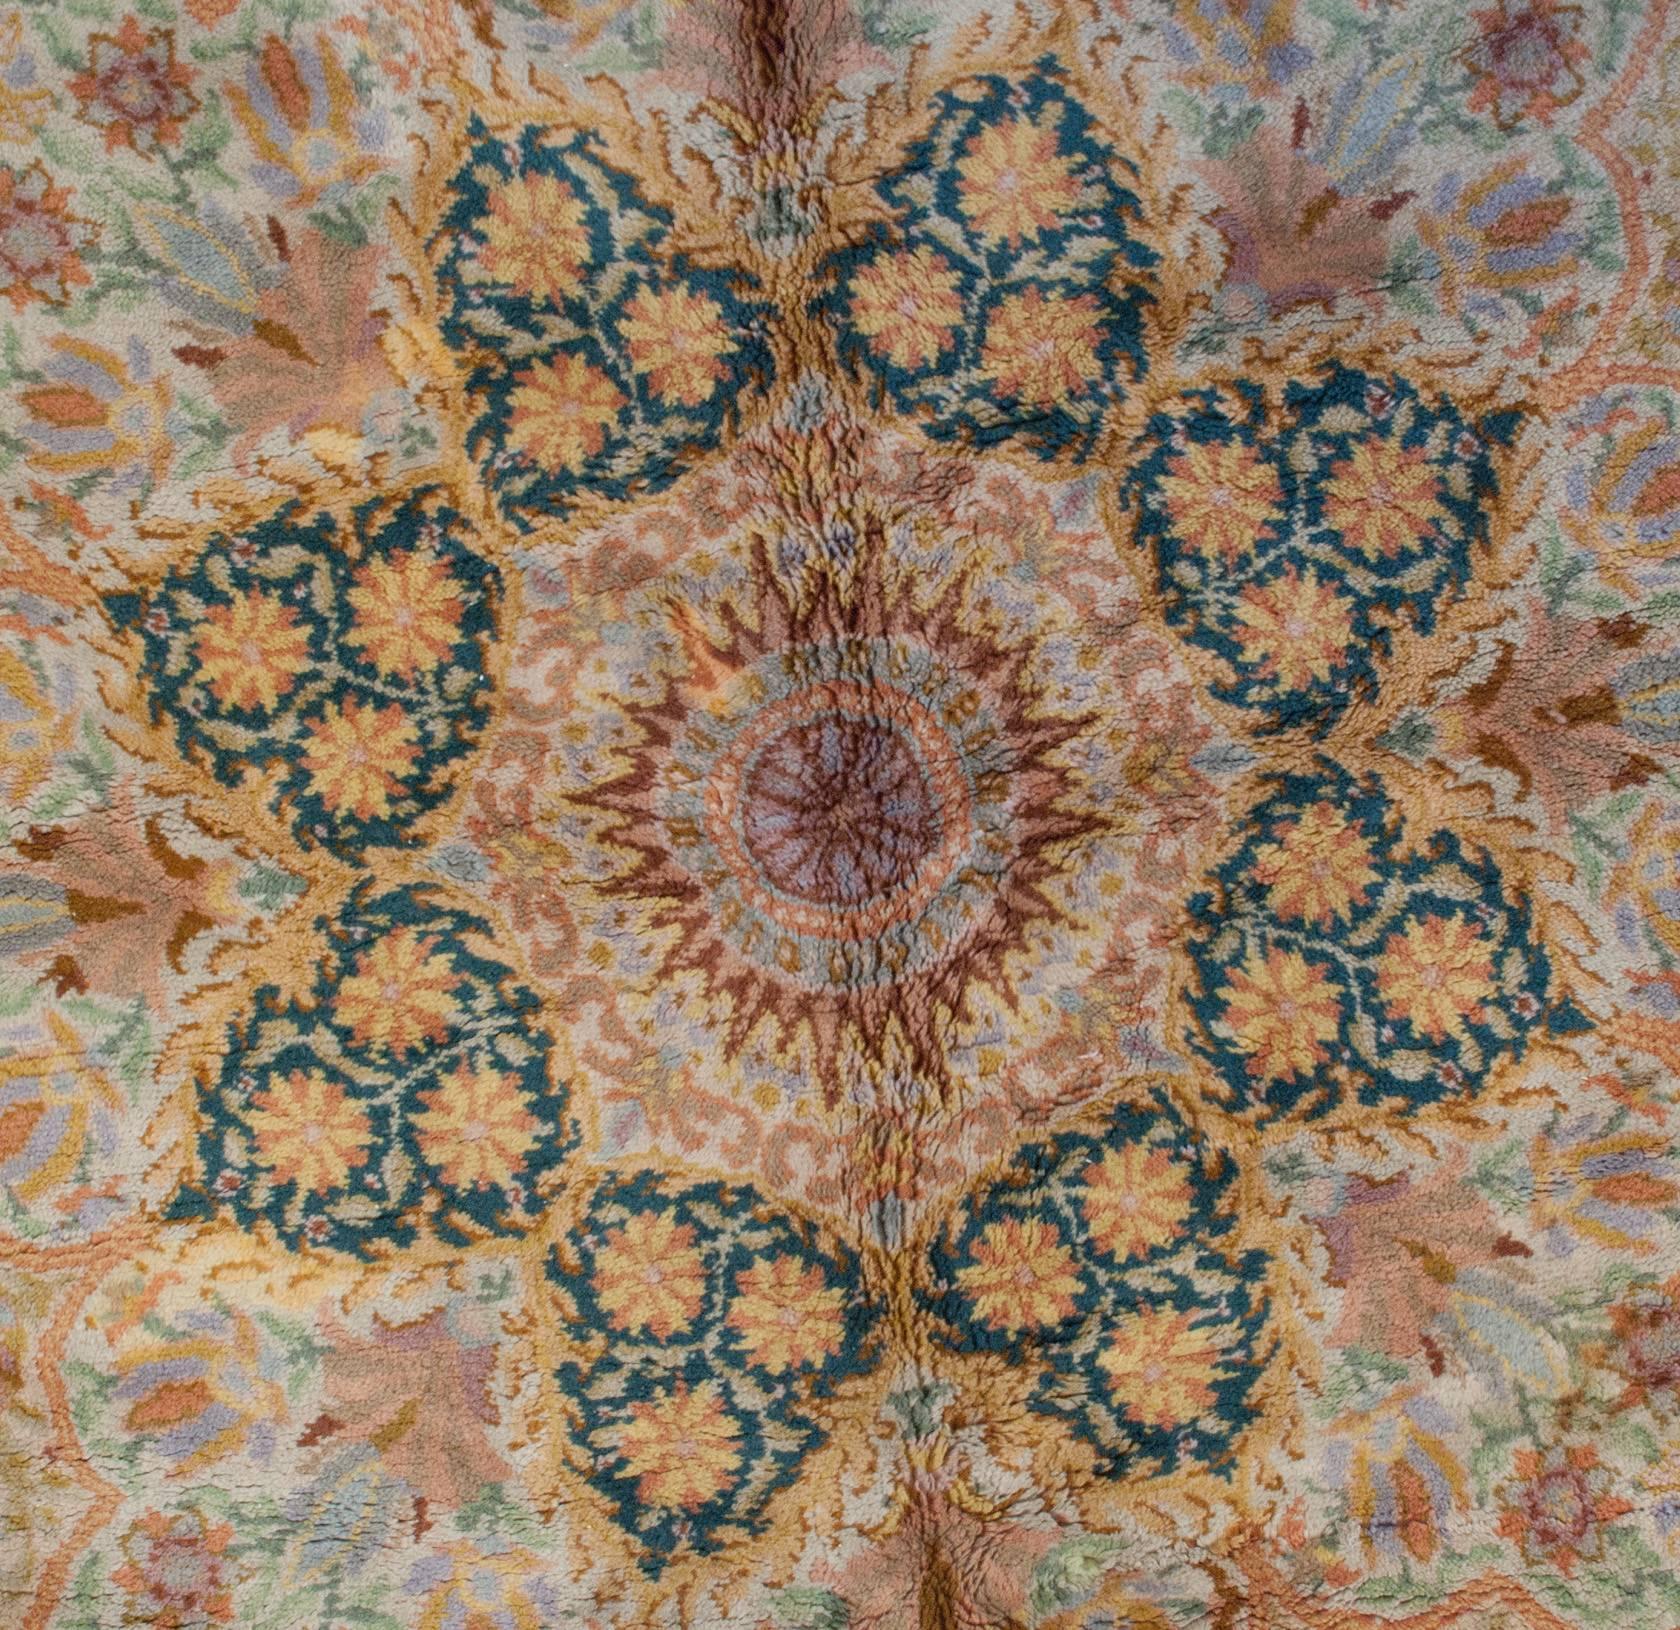 An unusual mid-20th century German rug with a beautifully and intensely woven Persian-inspired pattern with multiple stacked medallions radiating out of the center in hues of taupe, pale indigo, green, gold and orange. Each medallion is its own